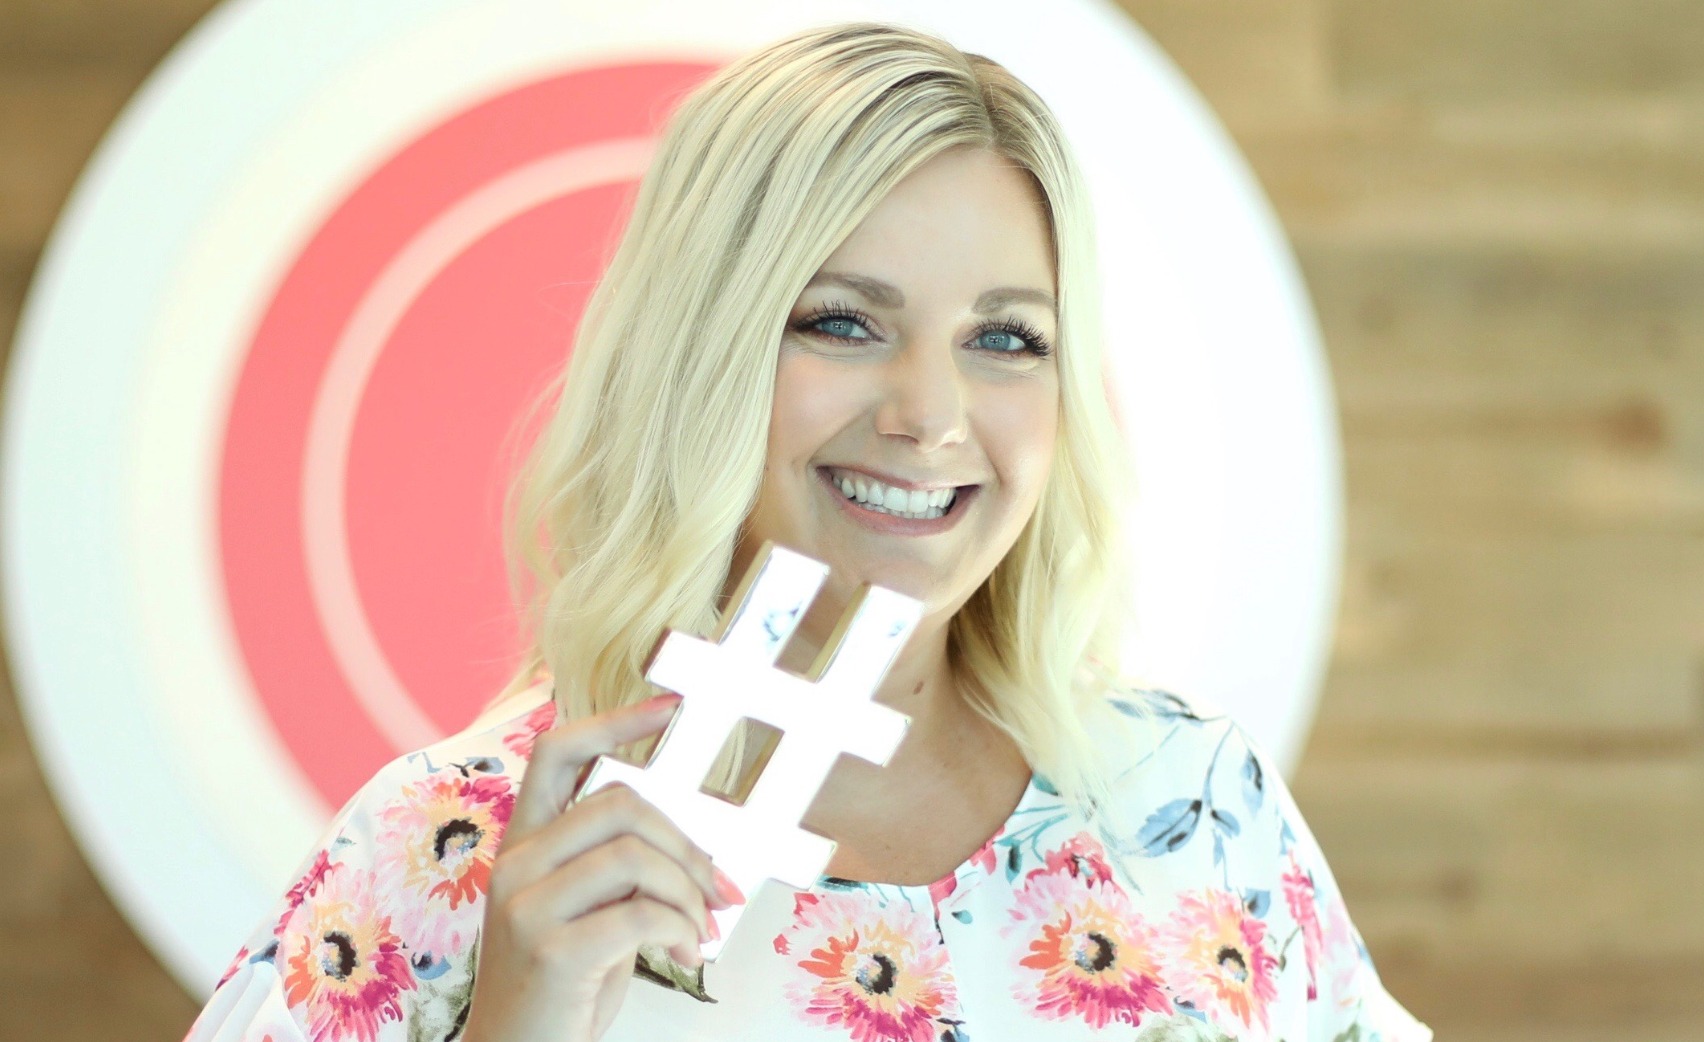 GOLD PR’s Social Media Team Breaks Down How To Use Branded & Targeted Hashtags